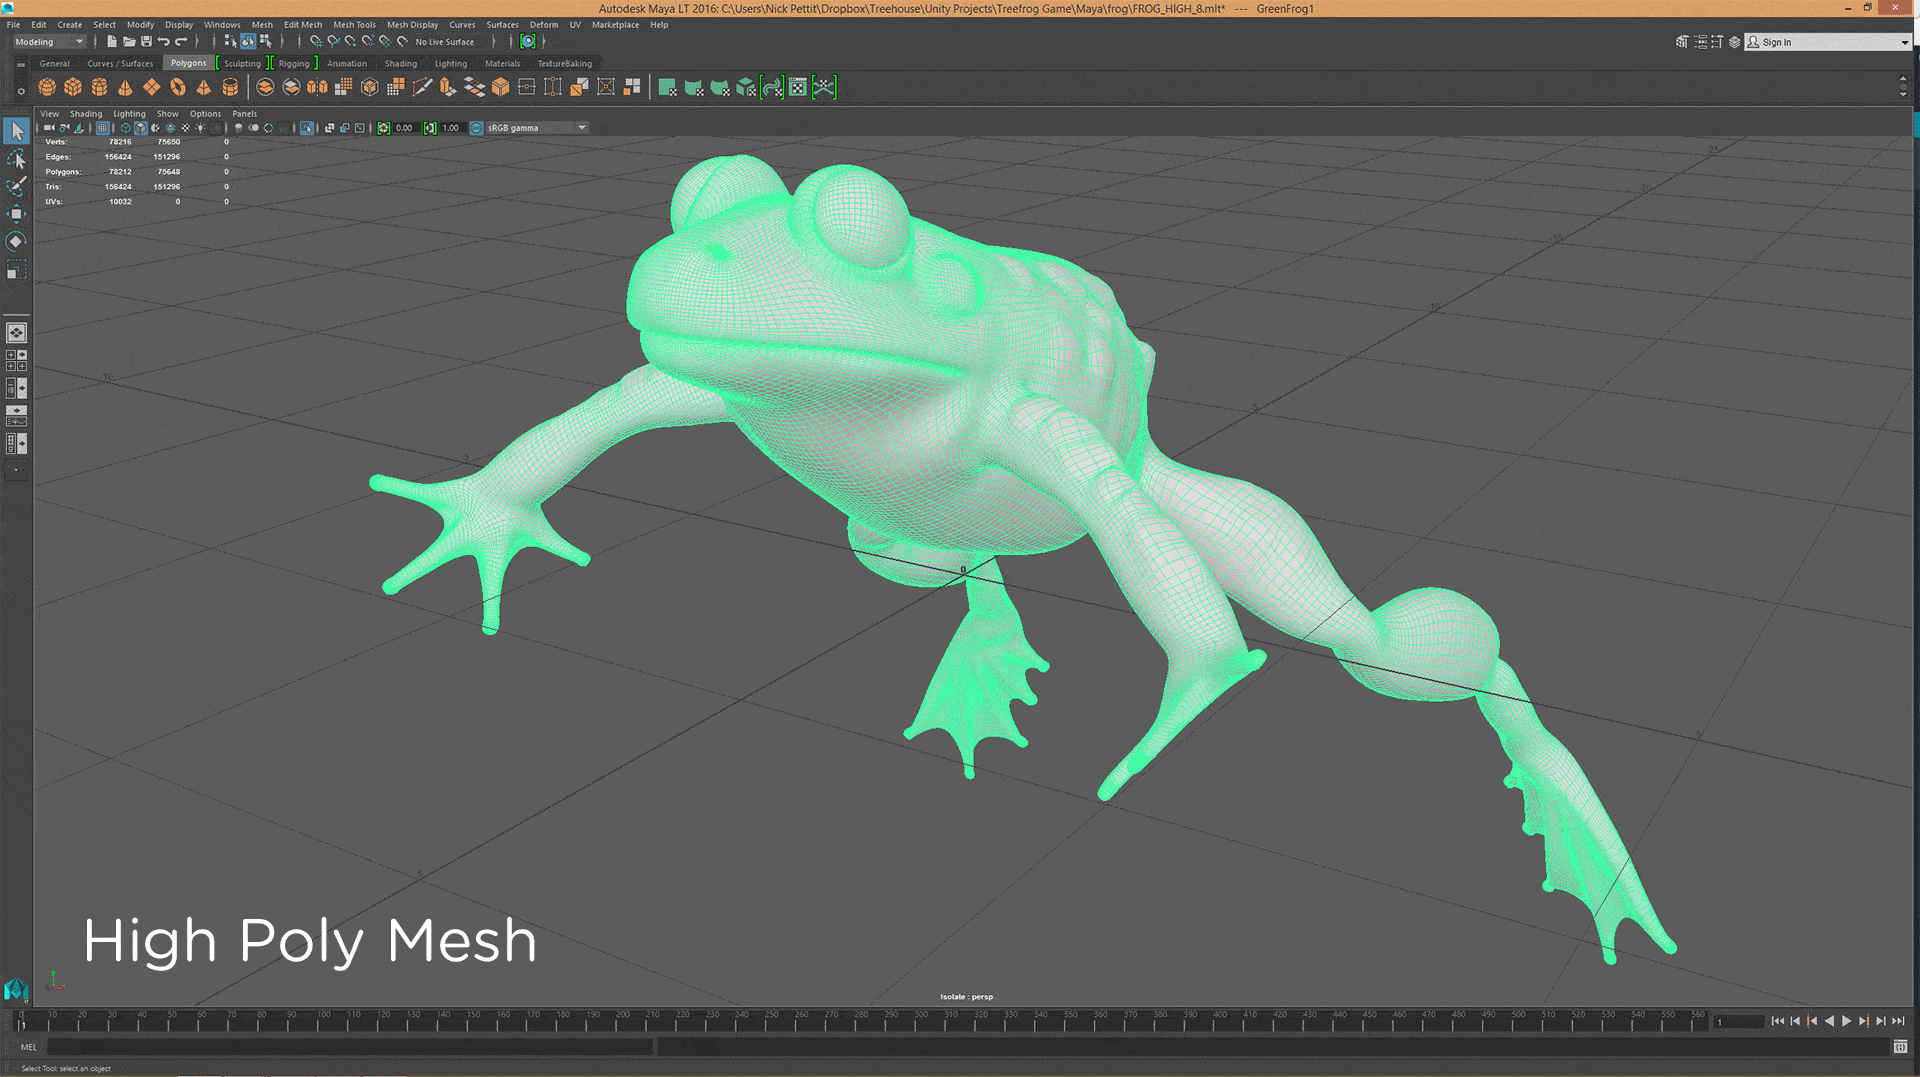 Animated gif demonstrating a low poly mesh and high poly mesh of a frog character in Maya.